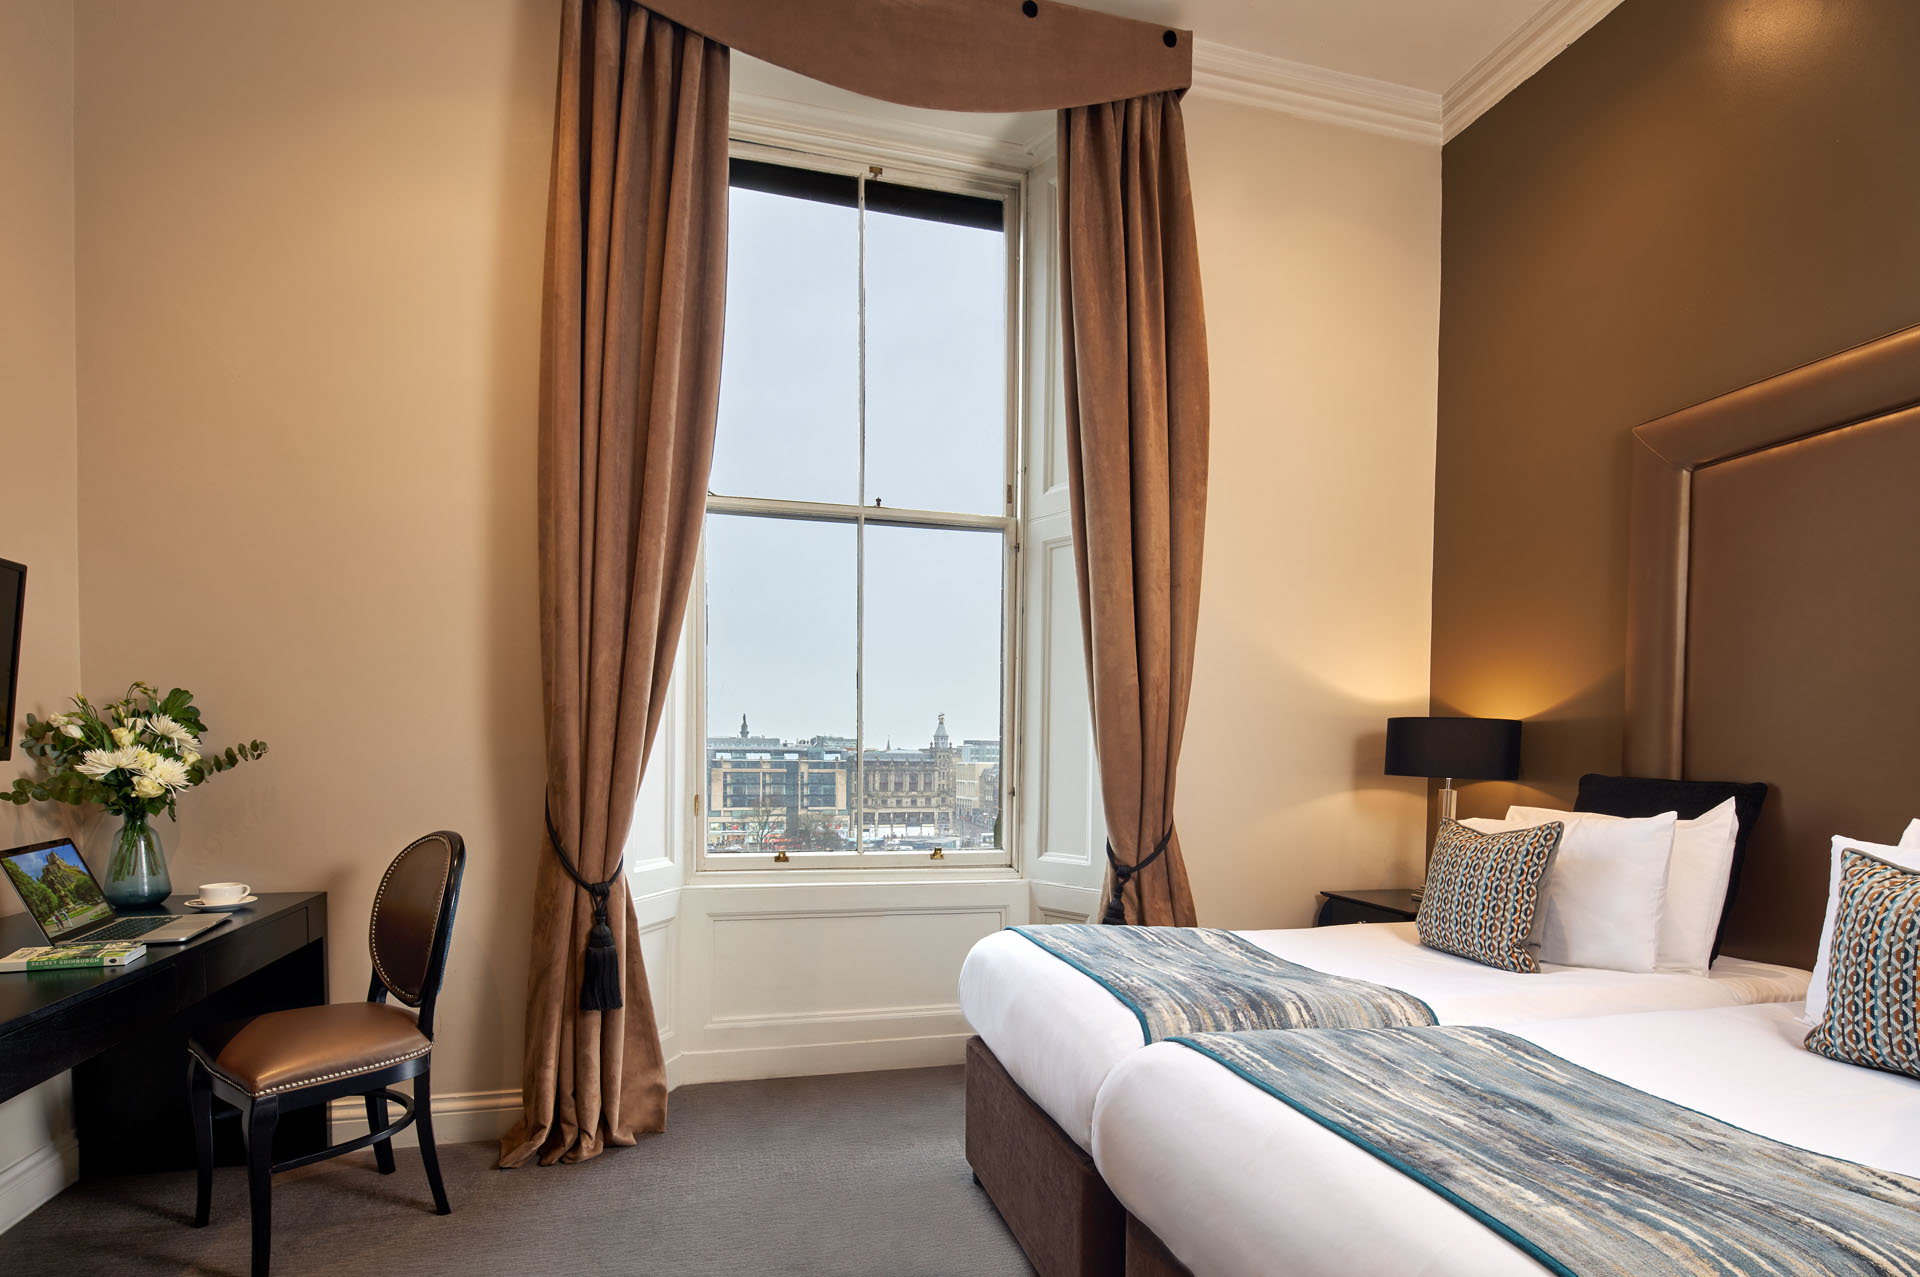 Overview of serviced hotel apartment for a long term stay in Edinburgh